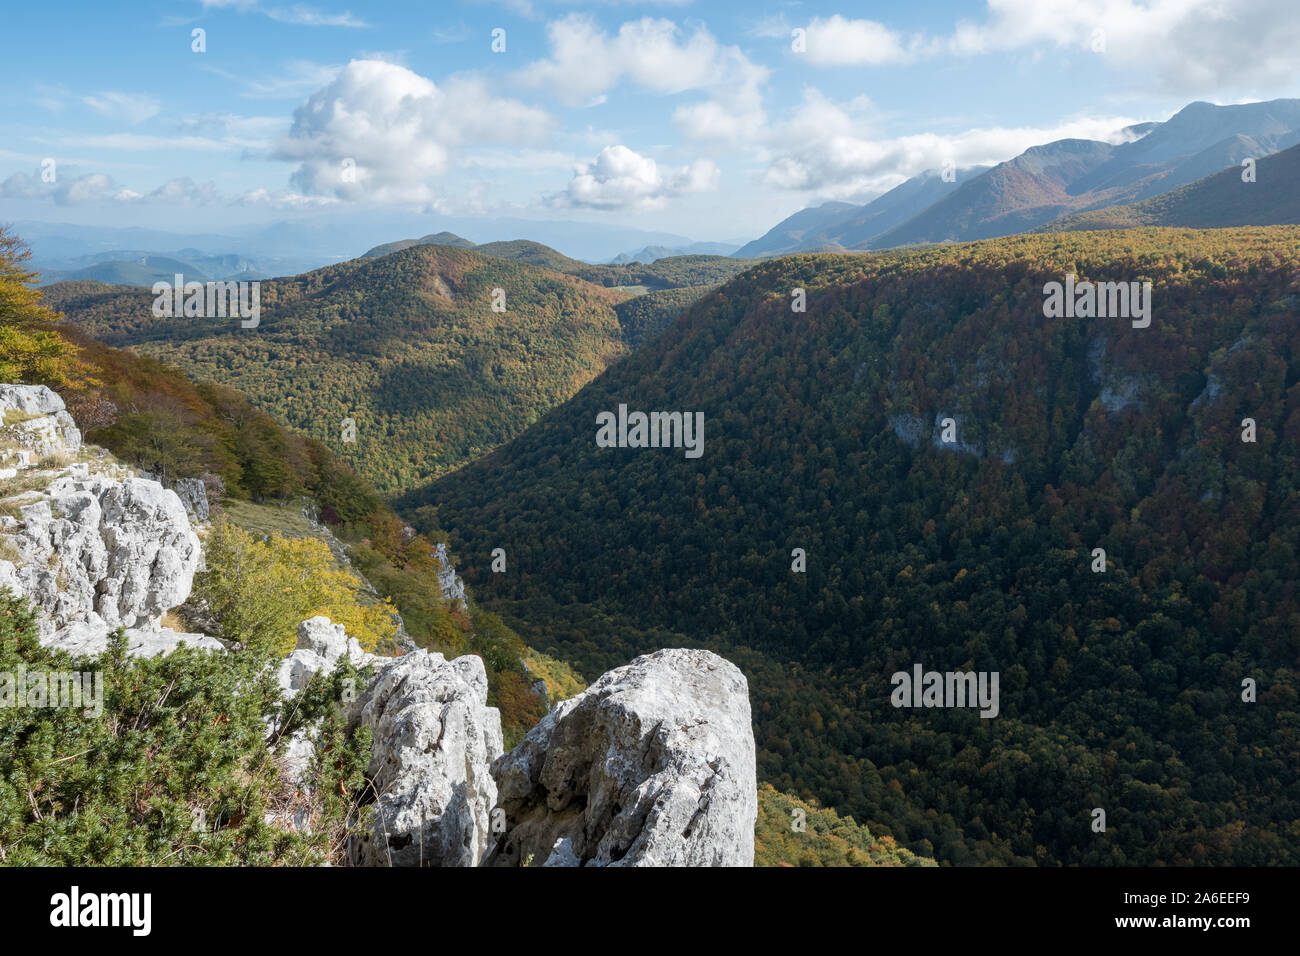 Impressive valley with dense forest and grey rocks in foreground in Abruzzo national Park, Barrea, Abruzzo, Italy Stock Photo